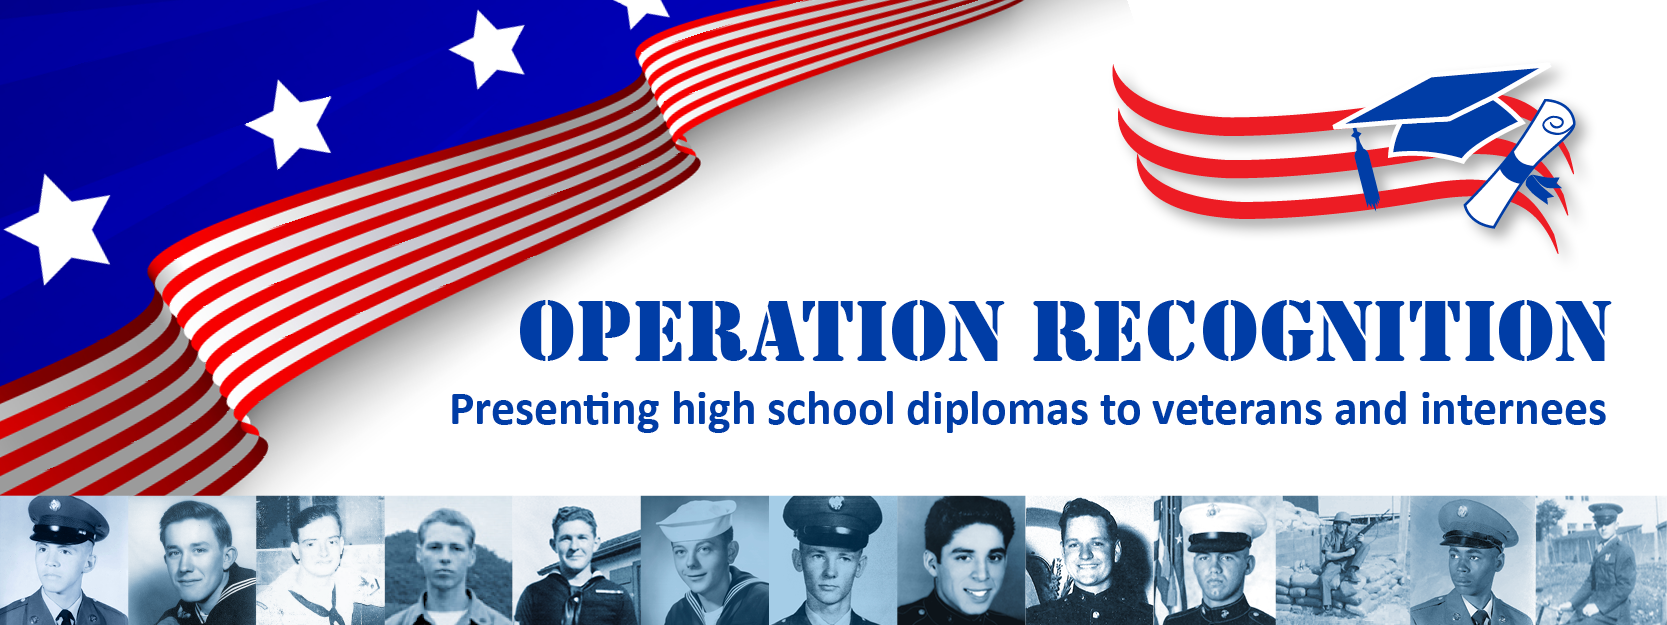 Operation Recognition. Presenting high school diplomas to veterans and internees.